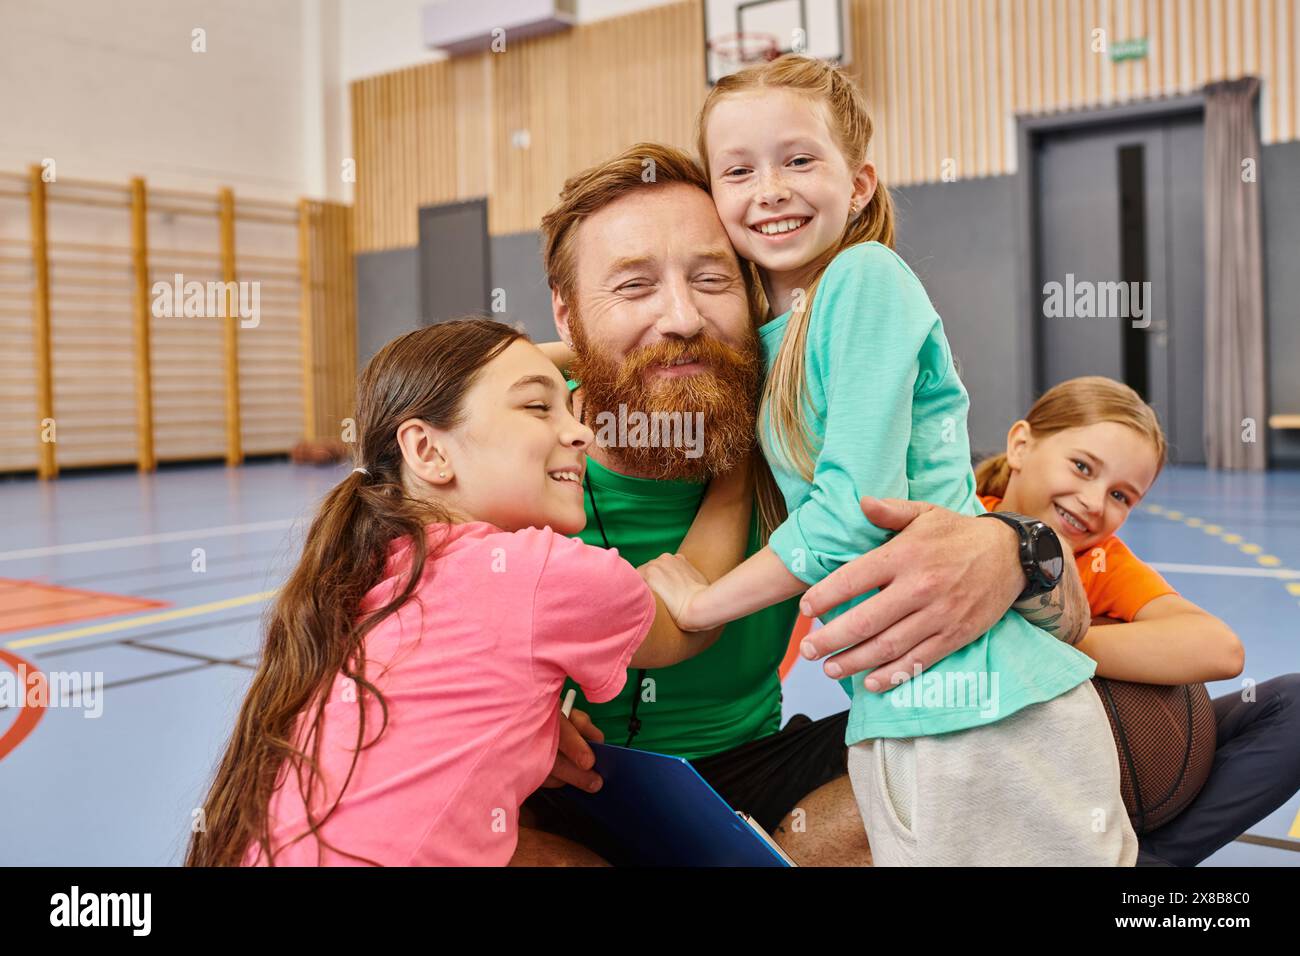 A bearded teacher with open arms, warmly hugging a diverse group of children in a vibrant classroom setting filled with laughter and joy. Stock Photo